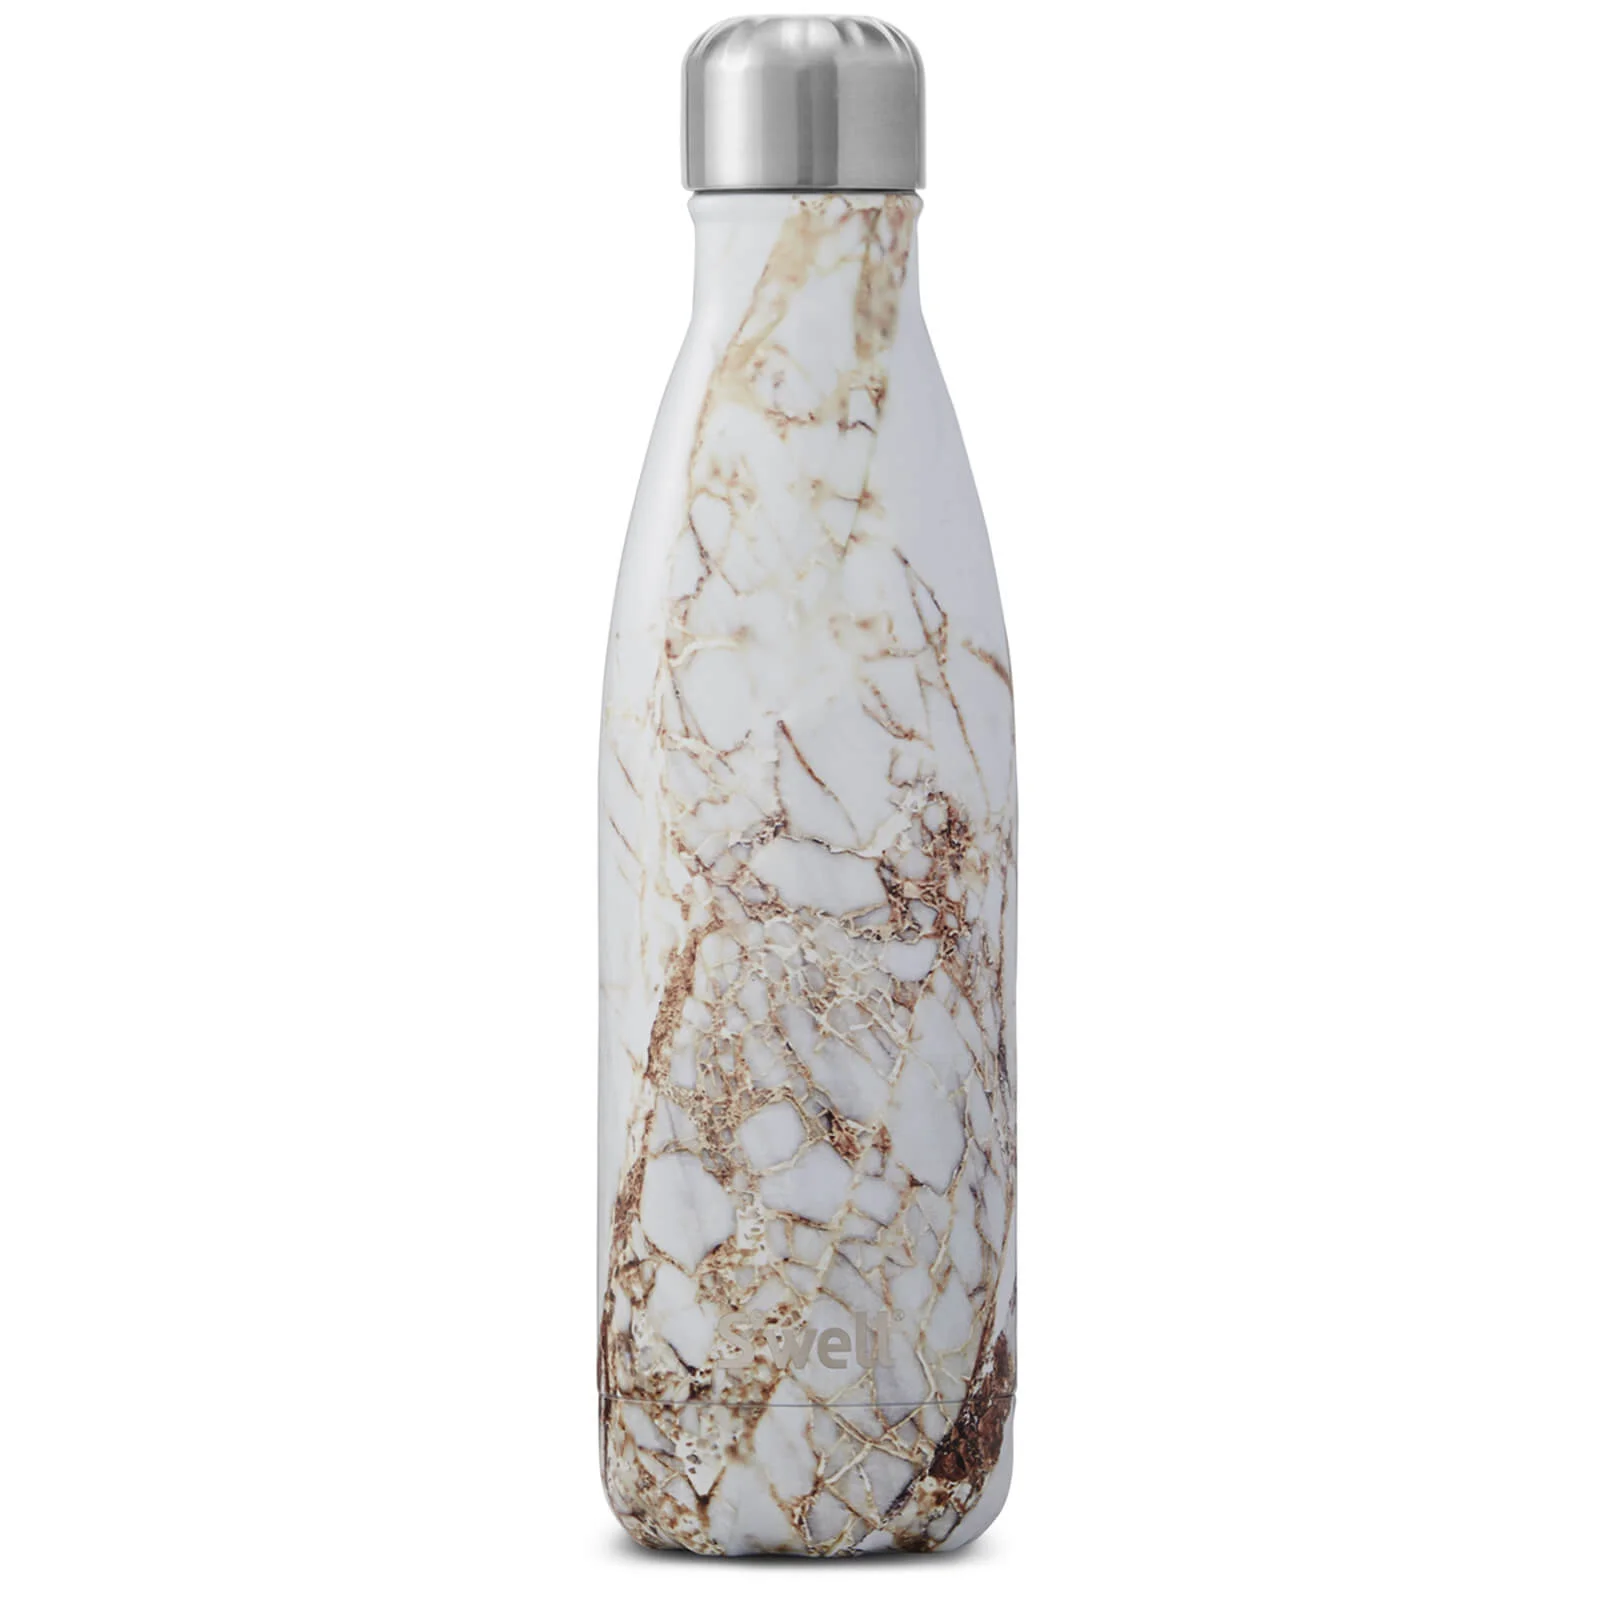 S'well The Calacatta Gold Water Bottle 500ml Image 1